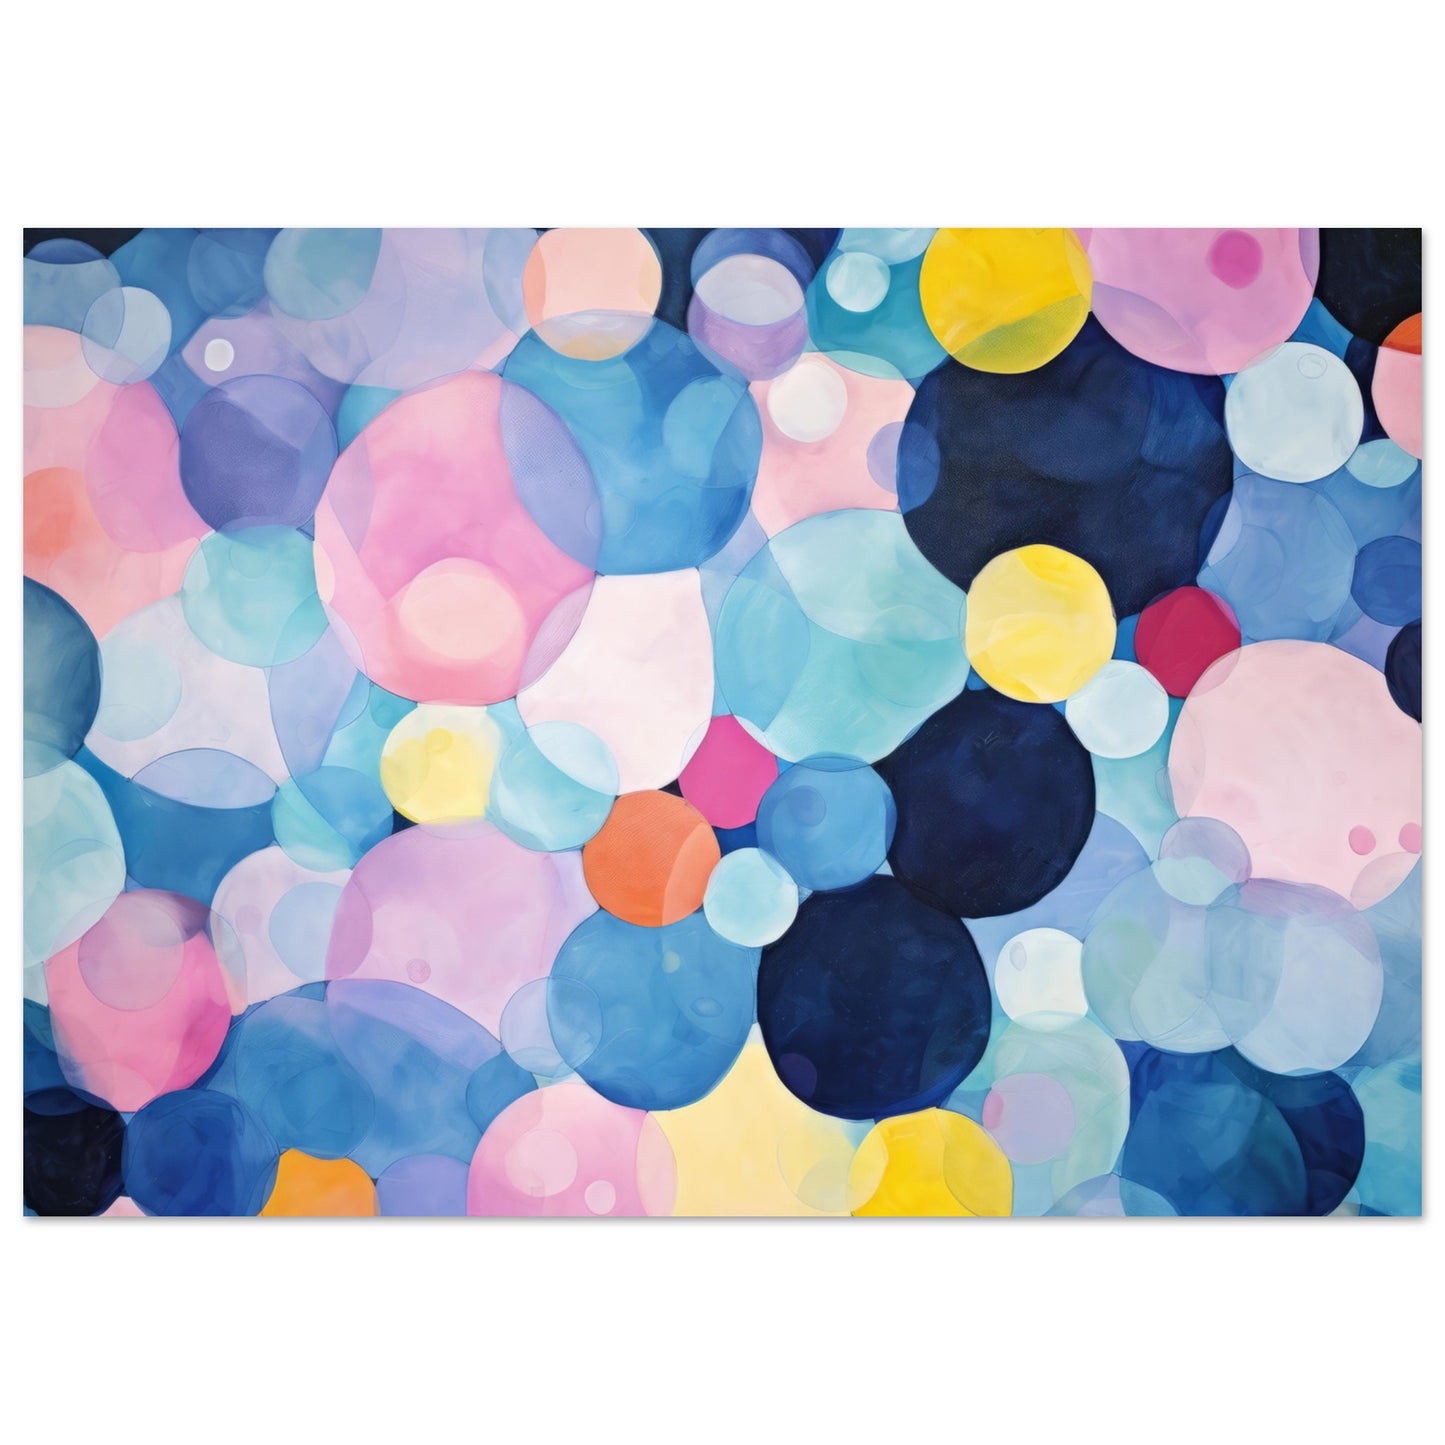 Abstract wall art titled "Blue Molecules," showcasing a myriad of overlapping translucent orbs in varying shades of blue, pink, yellow, and other colors, creating a serene and harmonious visual experience.